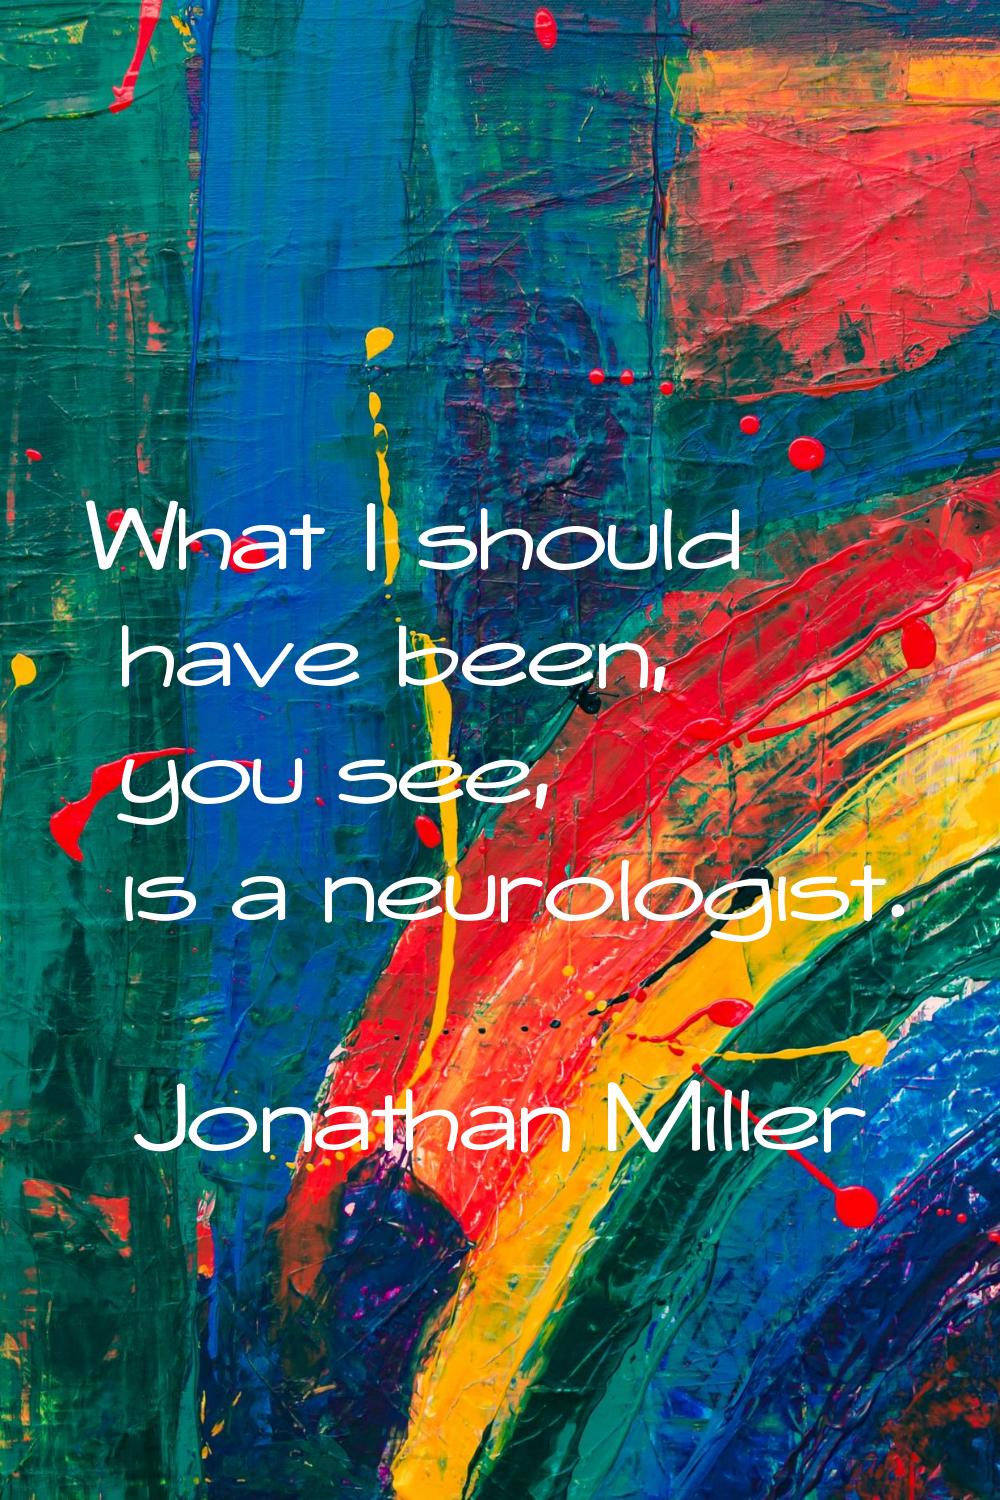 What I should have been, you see, is a neurologist.